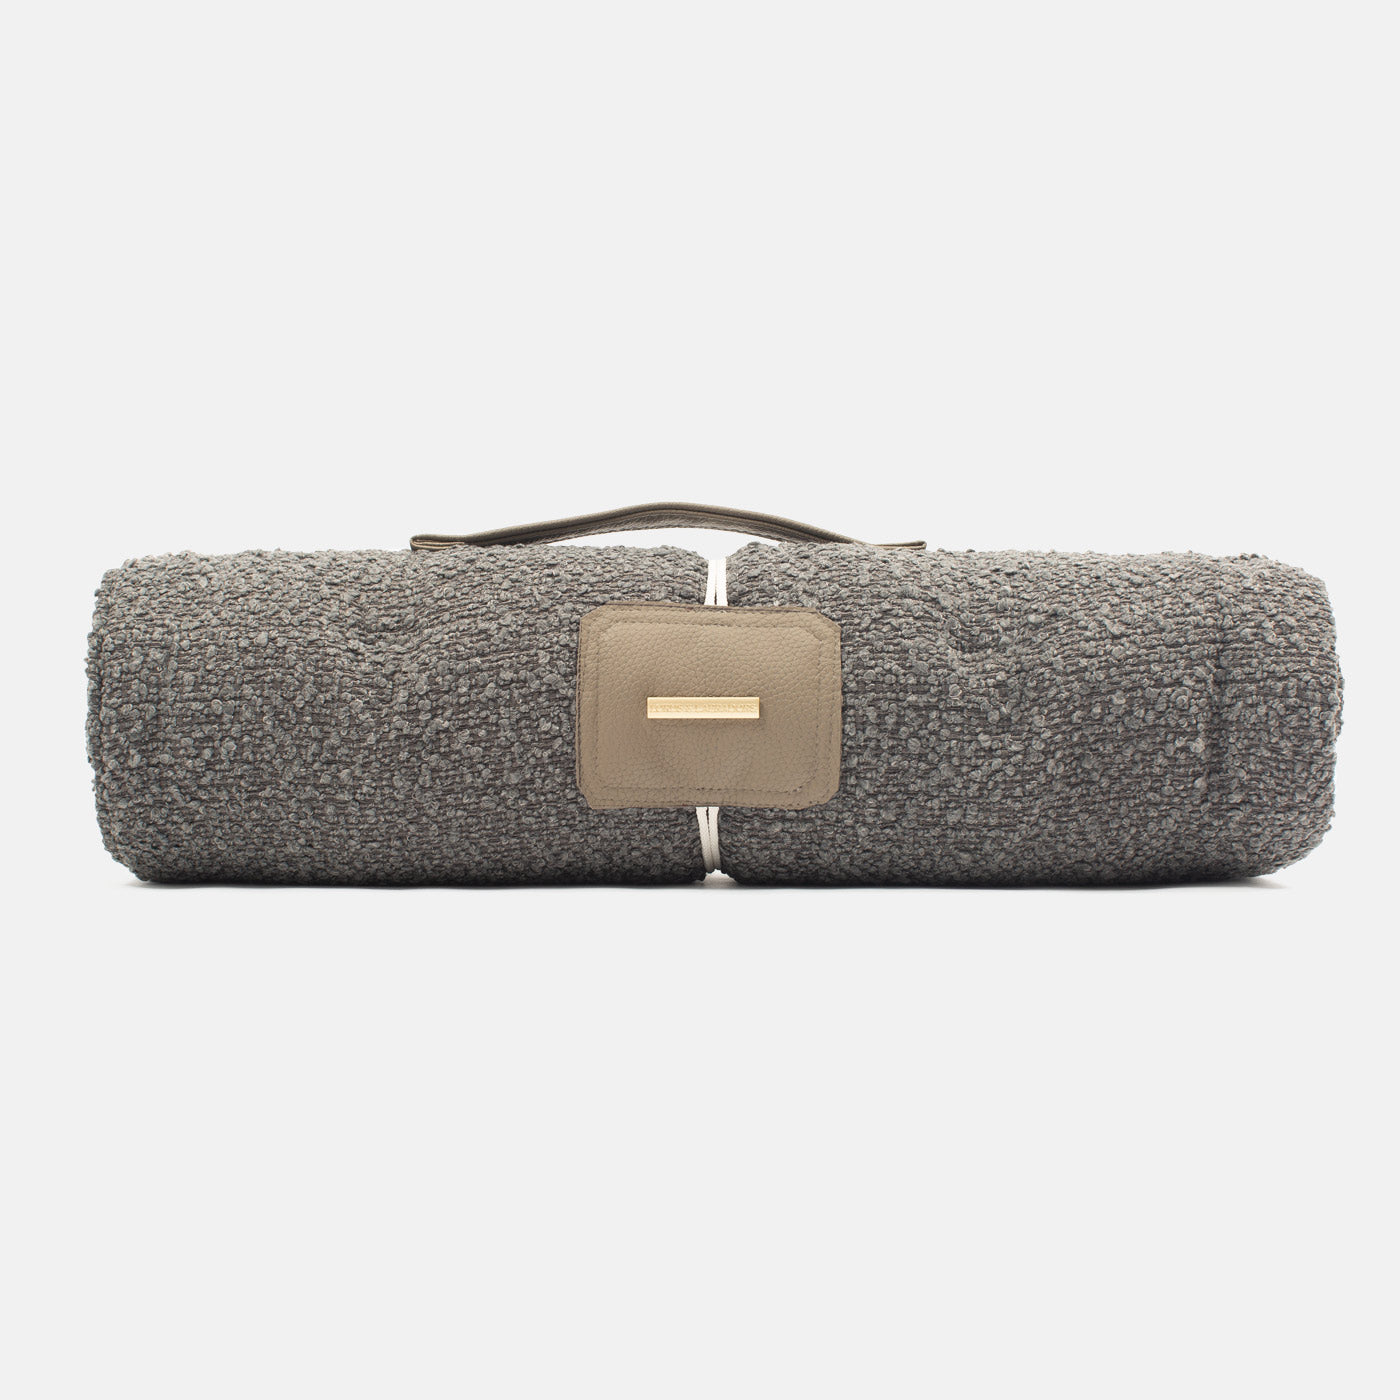 Embark on the perfect pet travel with our luxury Travel Mat in Granite Boucle. Featuring a Carry handle for on the move once Rolled up for easy storage, can be used as a seat cover, boot mat or travel bed! Available now at Lords & Labradors